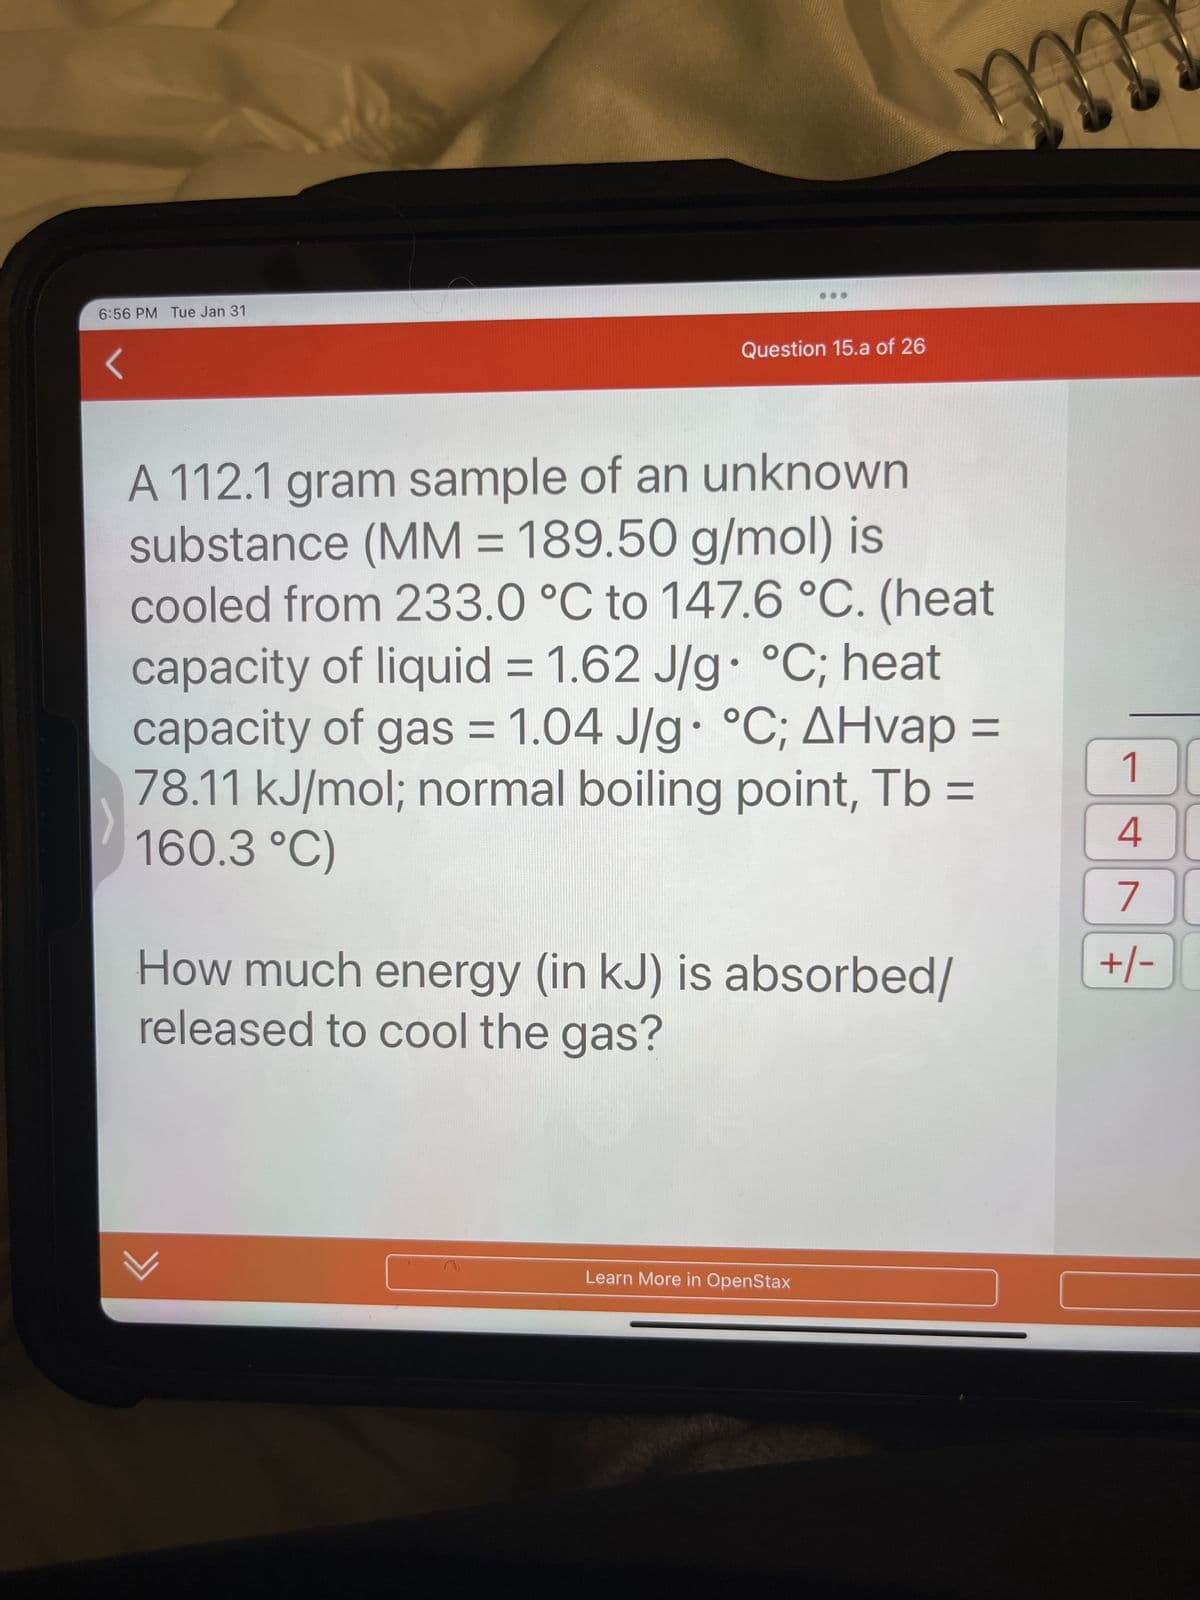 6:56 PM Tue Jan 31
Question 15.a of 26
A 112.1 gram sample of an unknown
substance (MM = 189.50 g/mol) is
cooled from 233.0 °C to 147.6 °C. (heat
capacity of liquid = 1.62 J/g °C; heat
capacity of gas = 1.04 J/g °C; AHvap =
78.11 kJ/mol; normal boiling point, Tb =
160.3 °C)
●
✓
m
333
How much energy (in kJ) is absorbed/
released to cool the gas?
Learn More in OpenStax
1
4
7
+/- 0